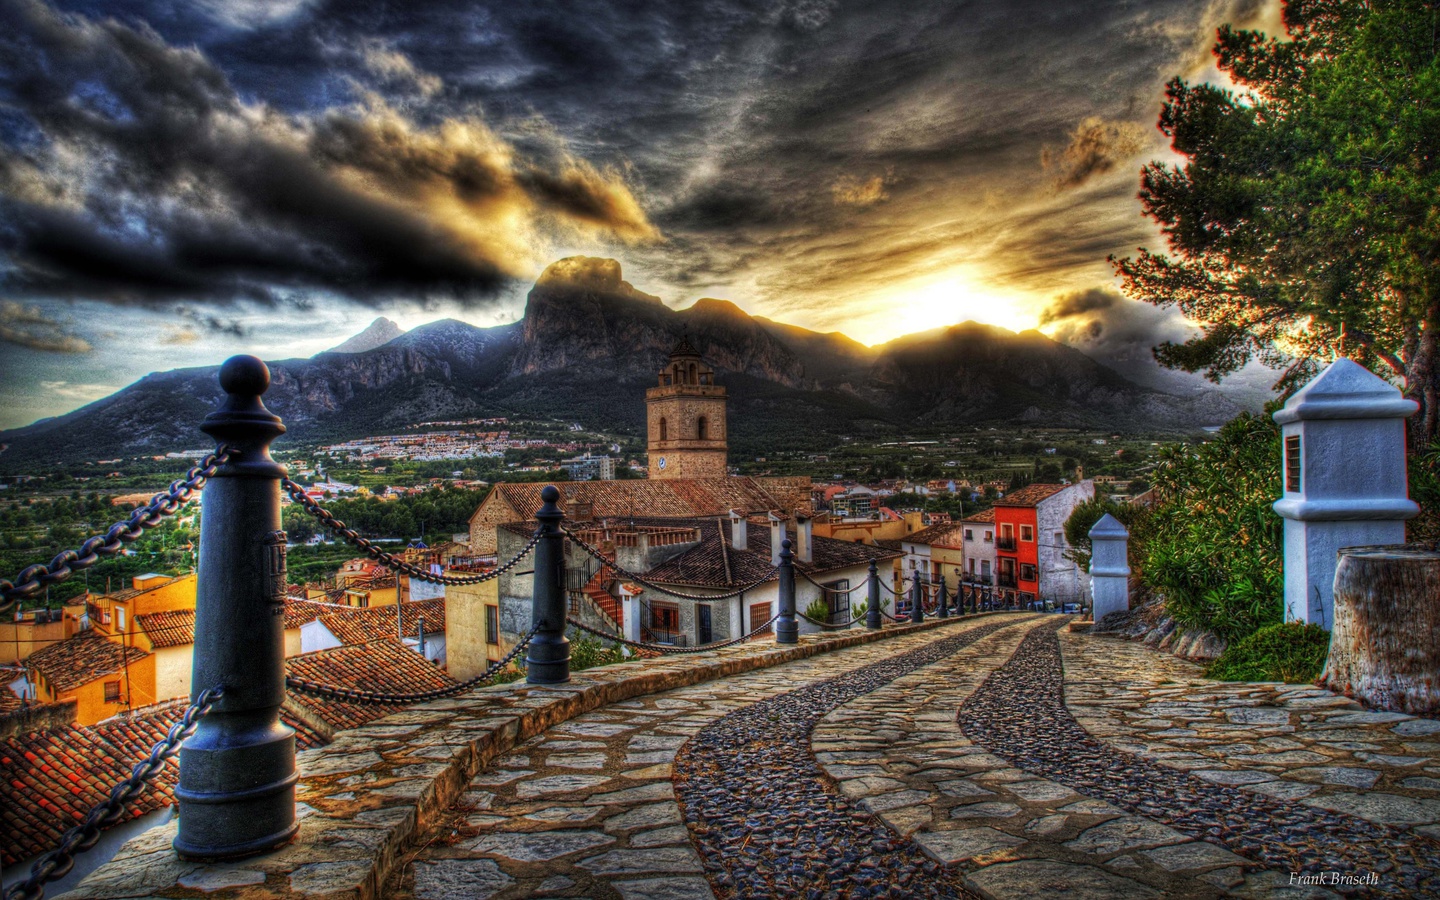 houses, road, old, mountain, street, Architecture, colorful, sky, colors, hdr, sunset, clouds